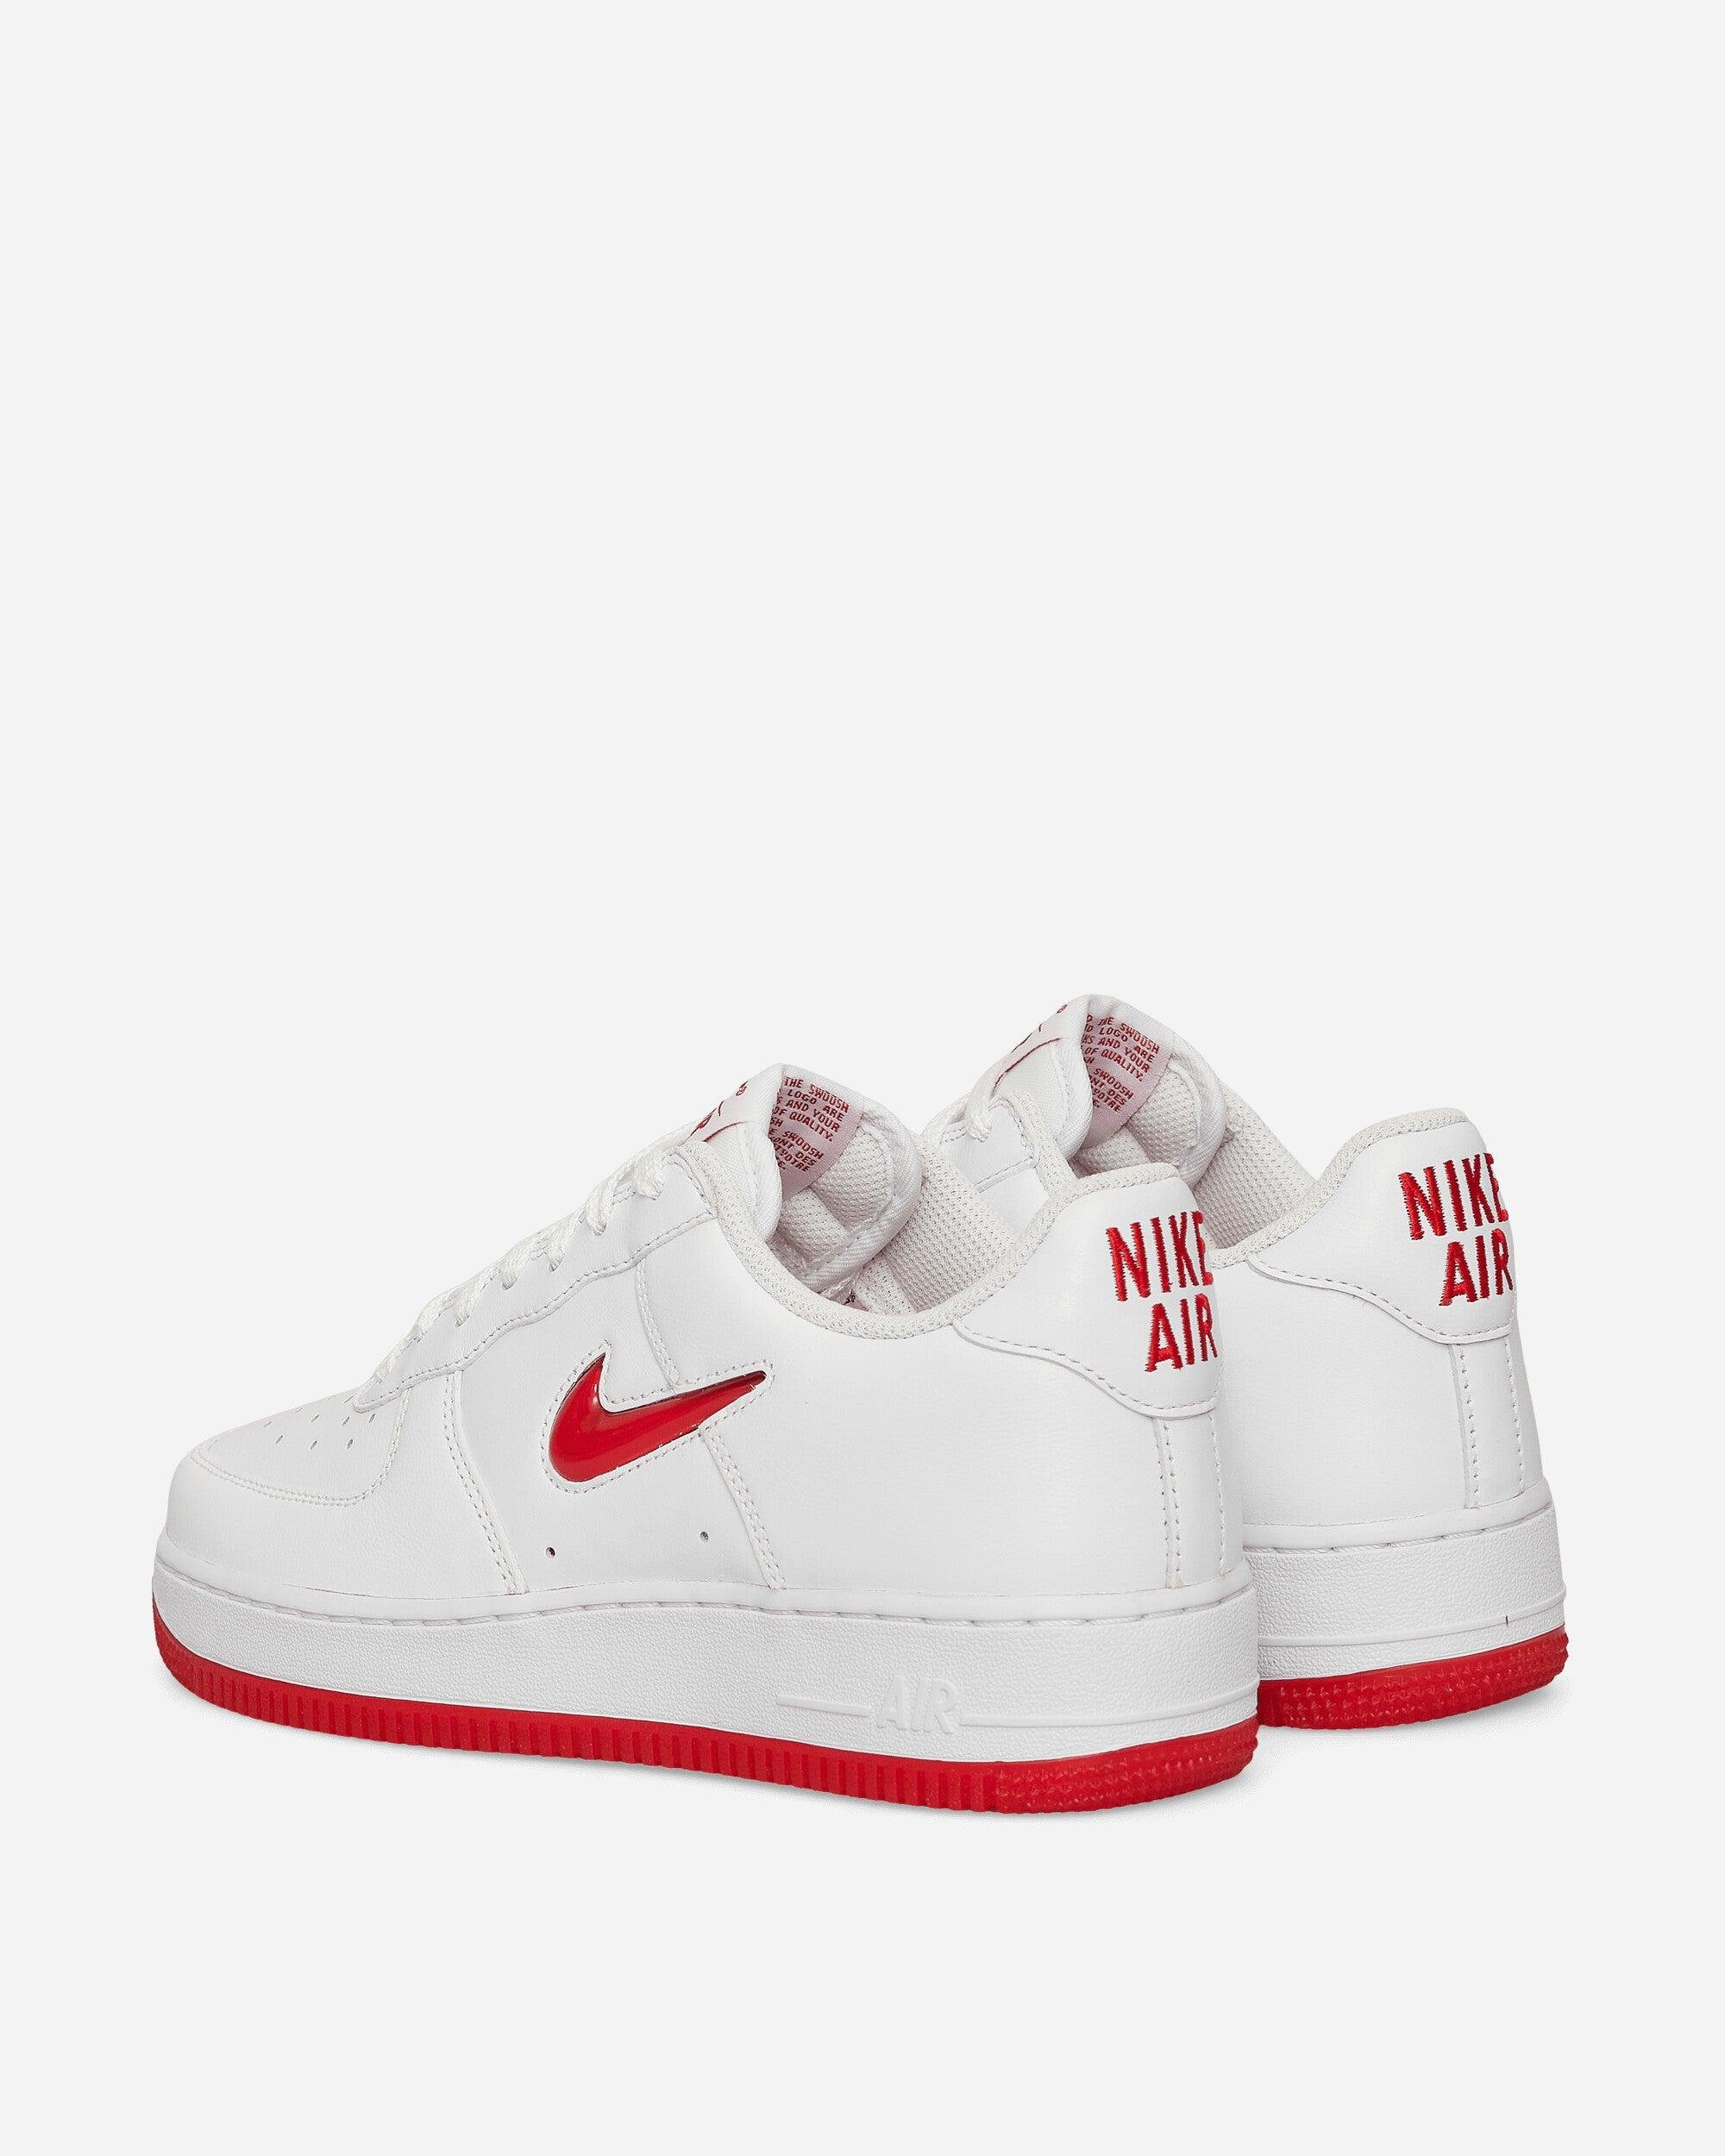 Nike Air Force 1 Low '07 LV8 Red